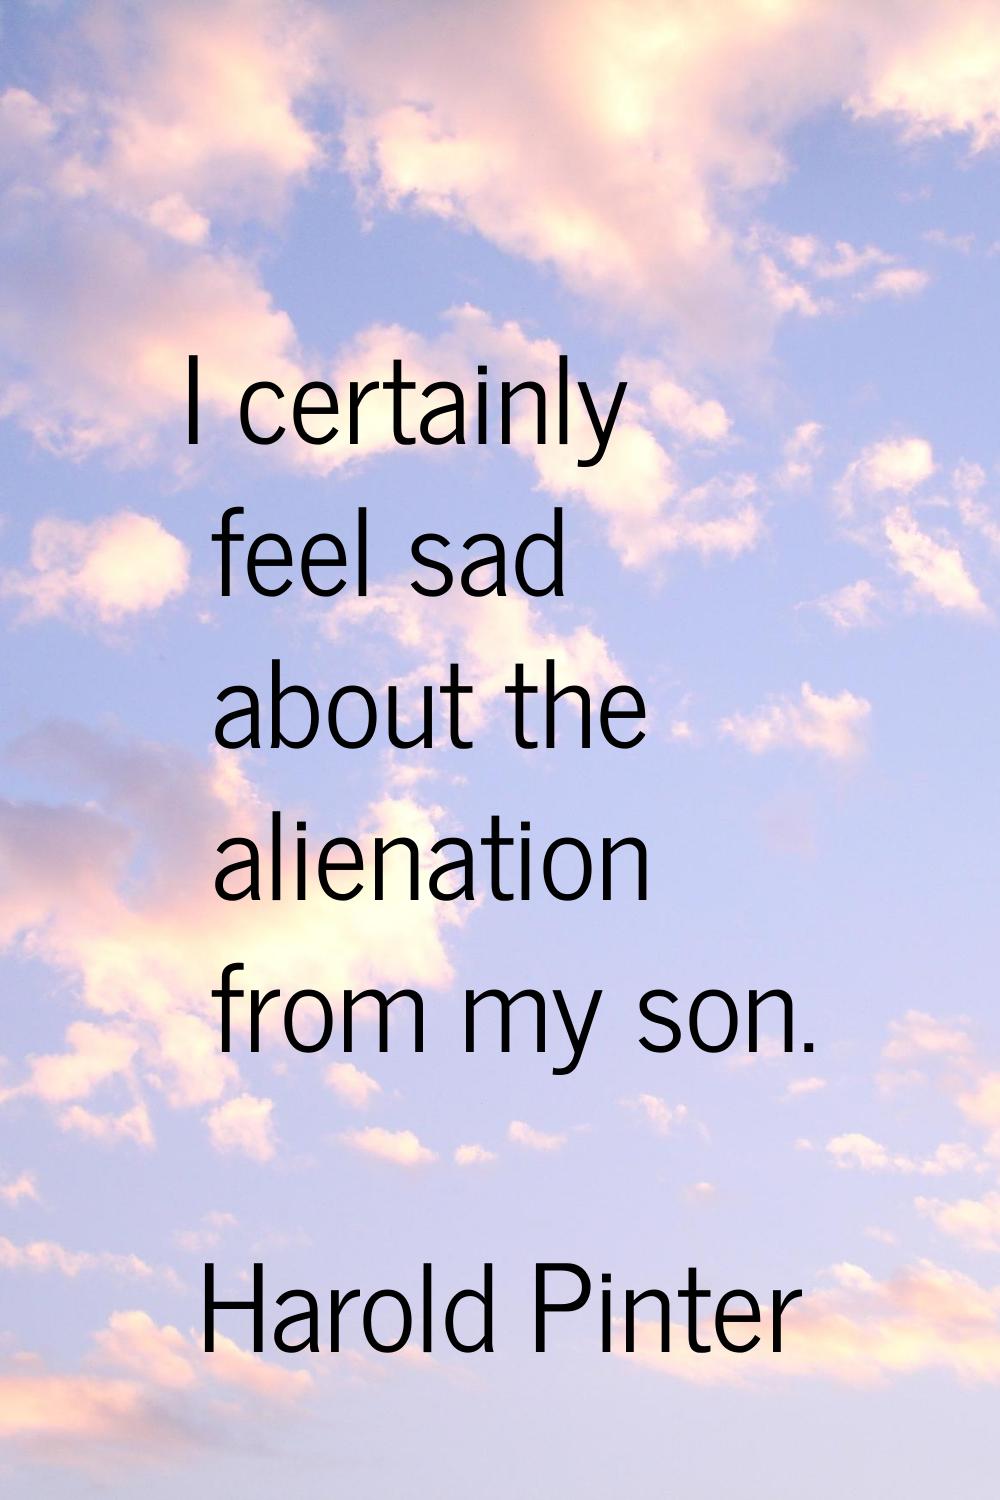 I certainly feel sad about the alienation from my son.